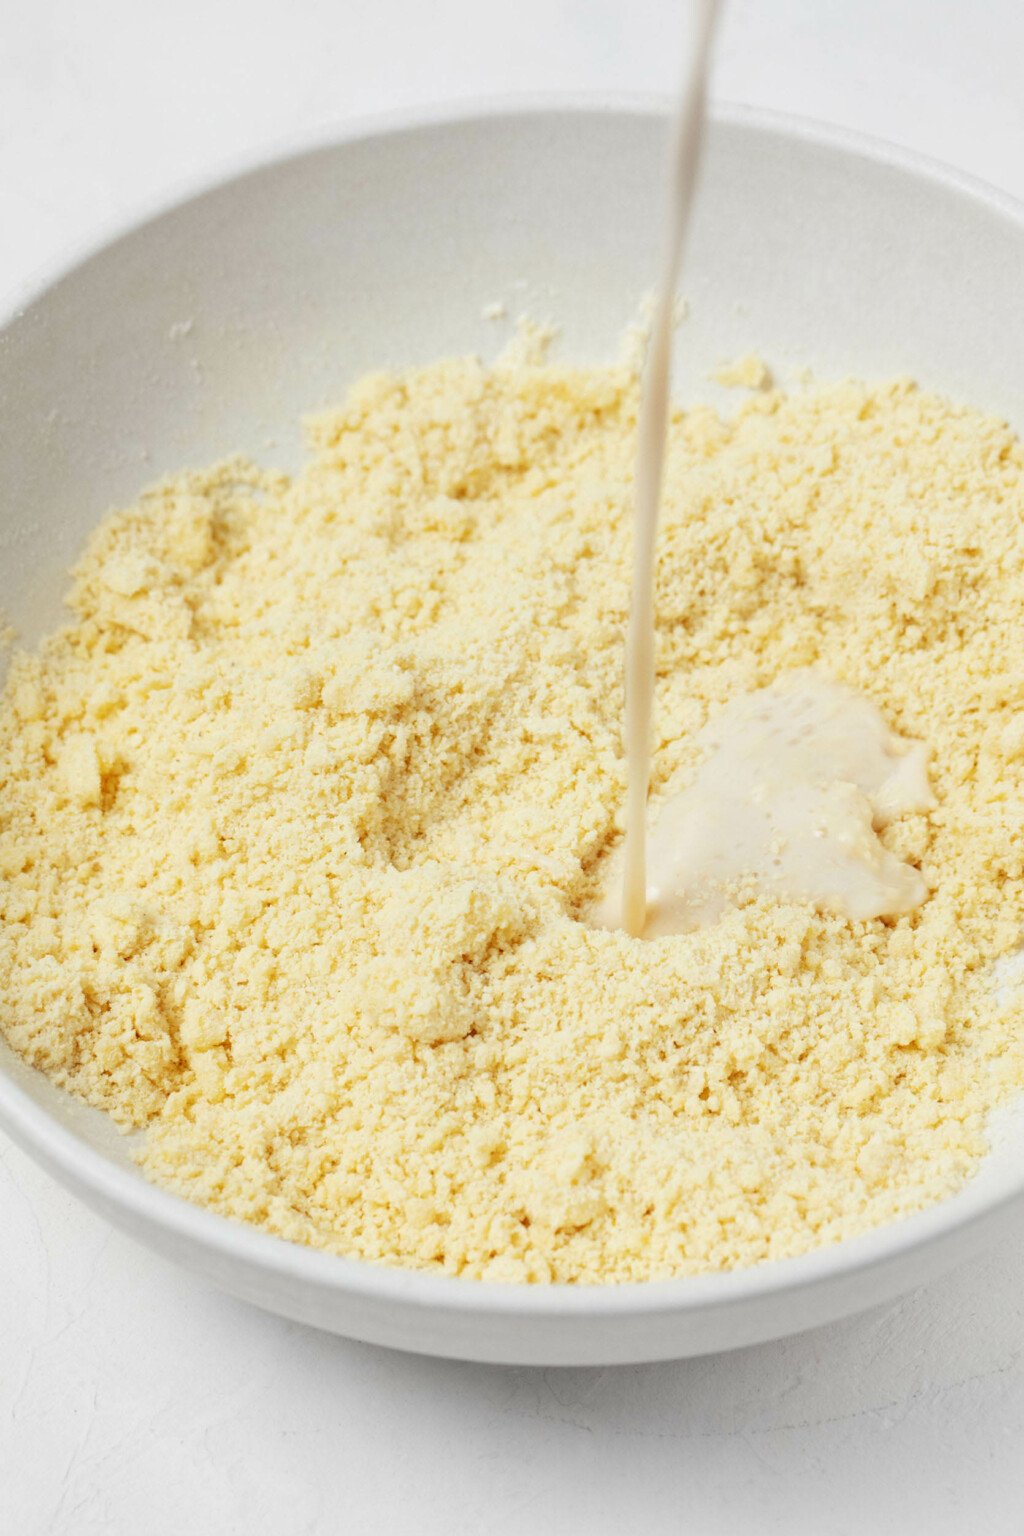 A thin stream of milk is pictured. It's being poured into a mixing bowl with dry ingredients that include cornmeal and flour.